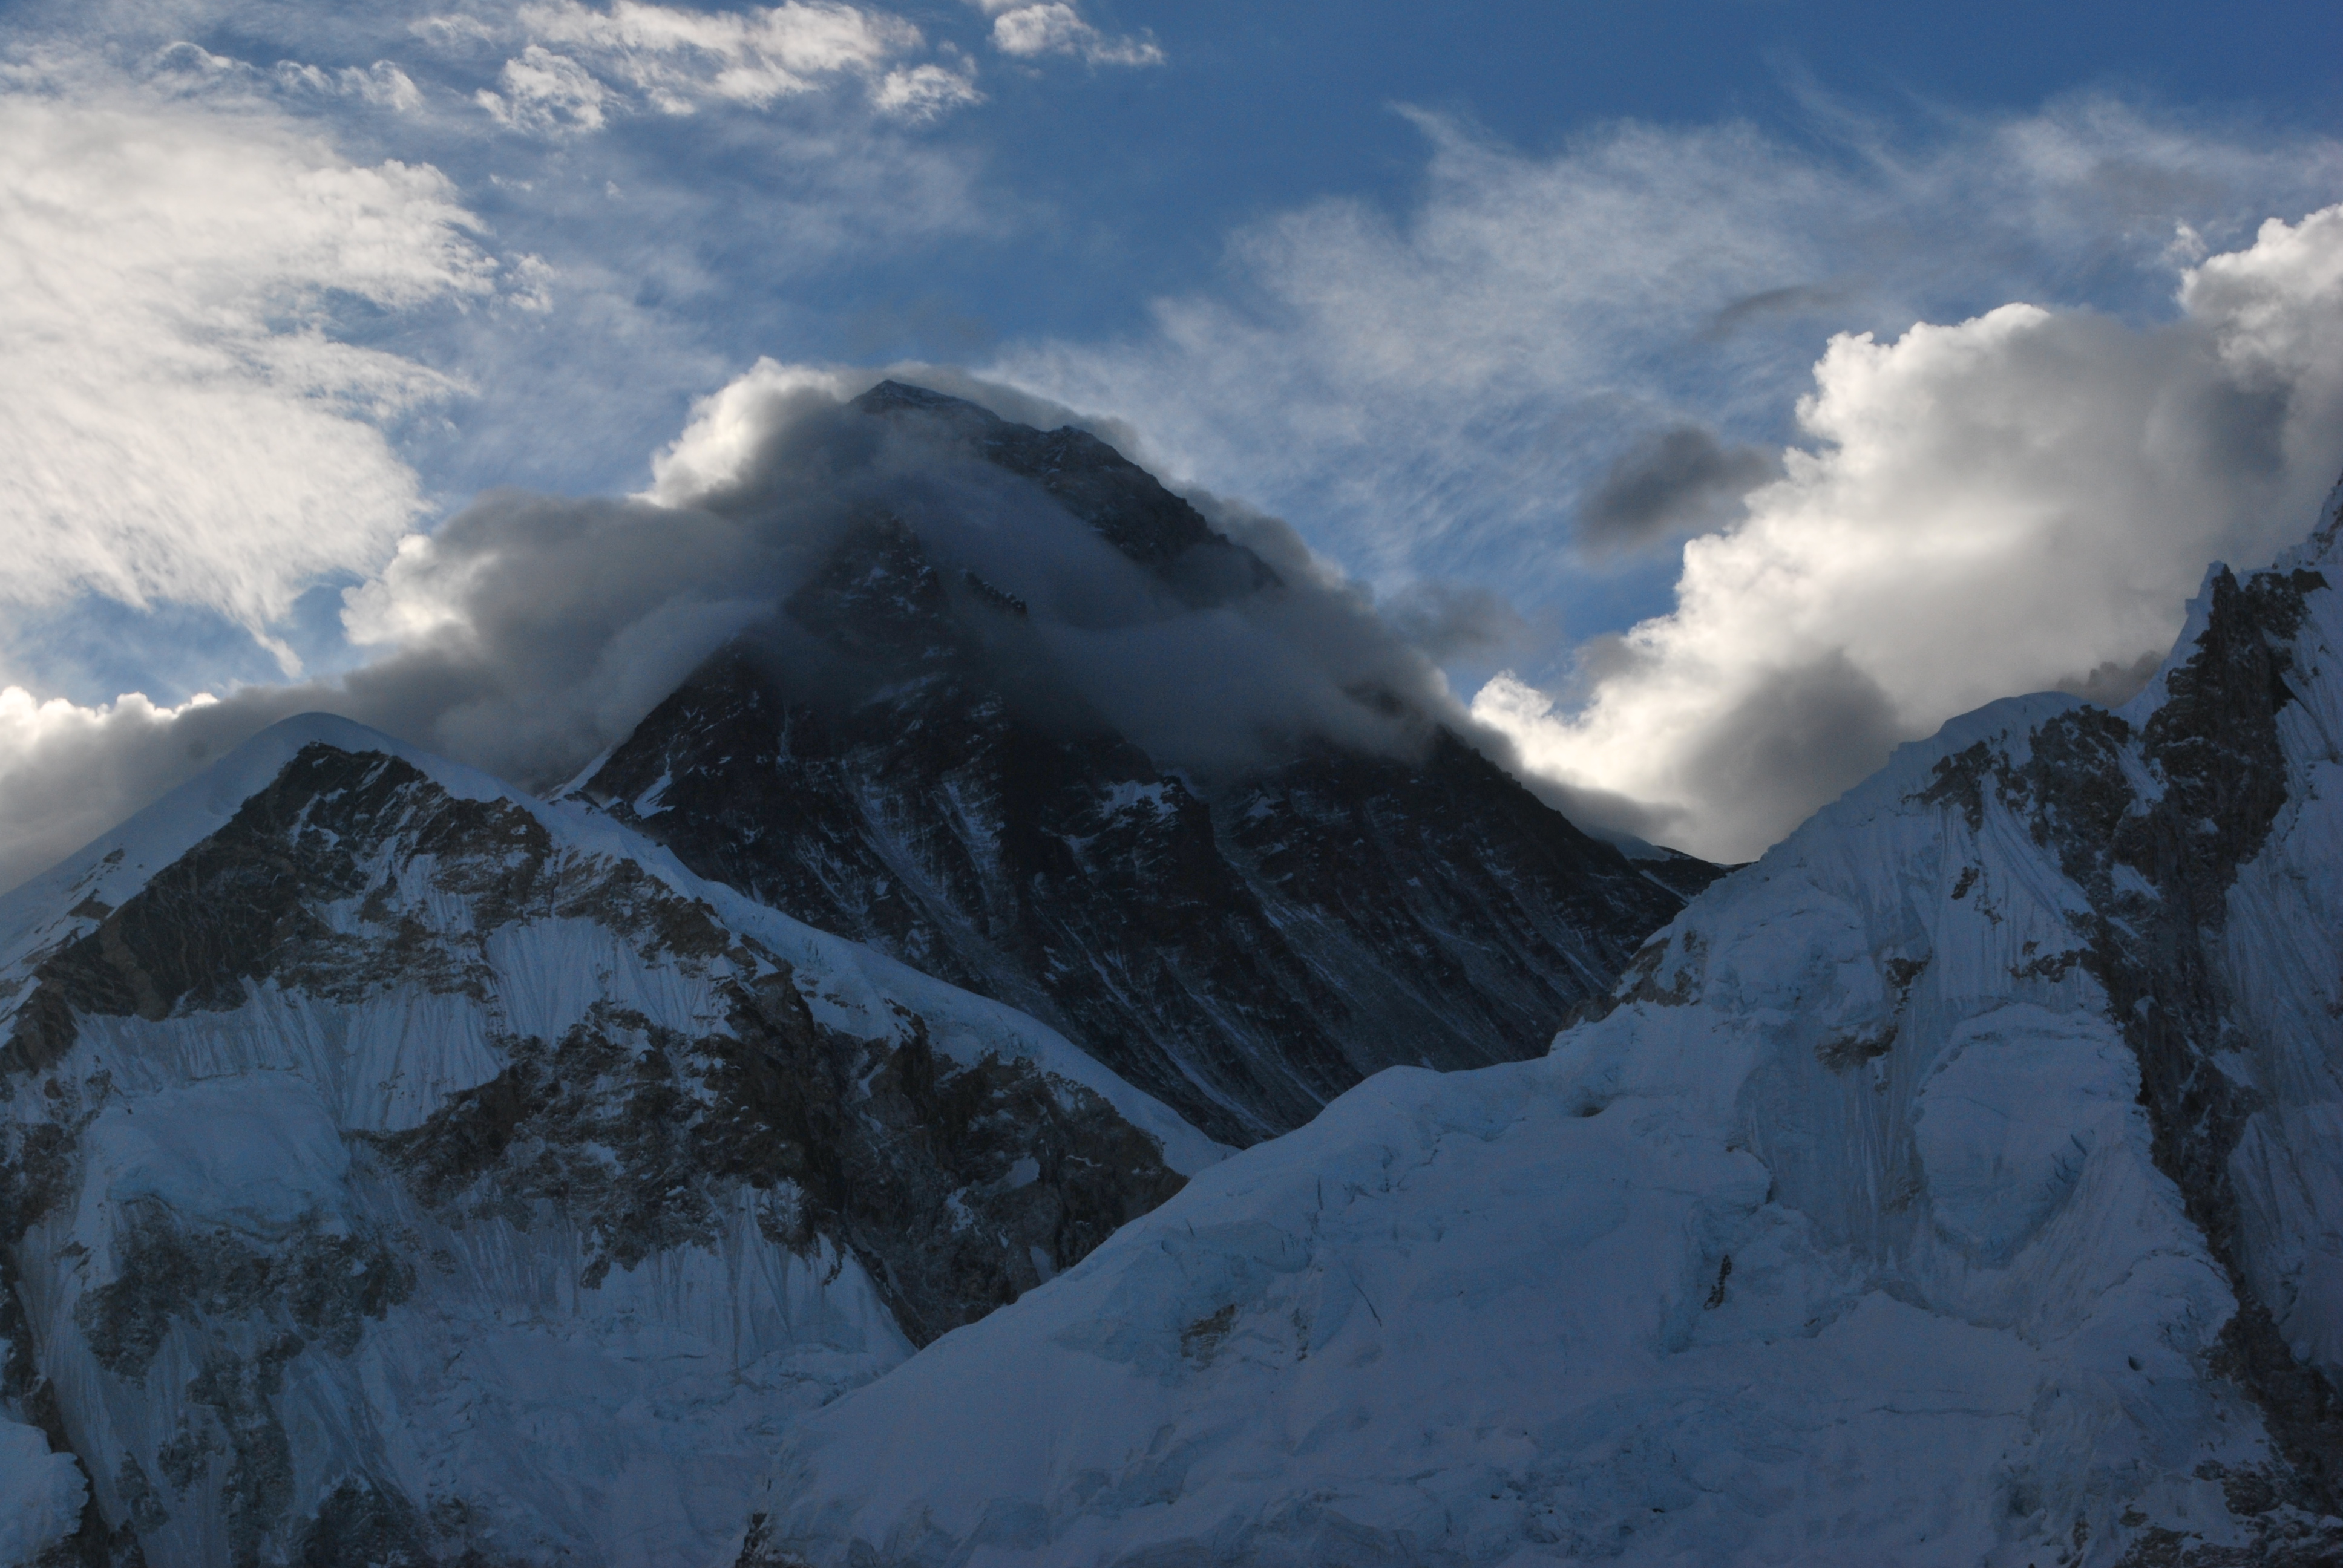 Mt. Everest Covered in Clouds View from Kalapathar